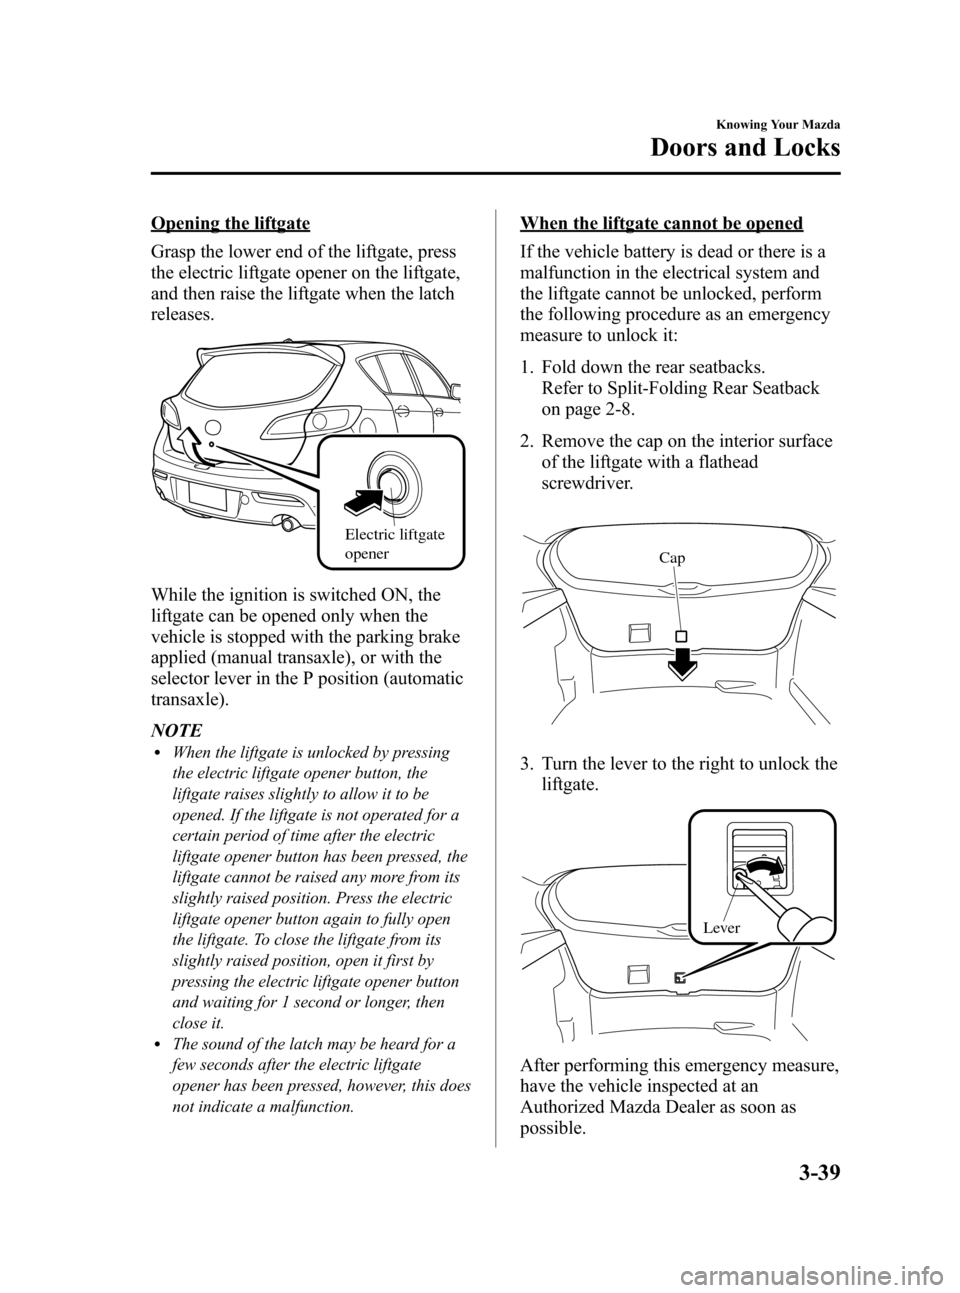 MAZDA MODEL 3 HATCHBACK 2011  Owners Manual (in English) Black plate (115,1)
Opening the liftgate
Grasp the lower end of the liftgate, press
the electric liftgate opener on the liftgate,
and then raise the liftgate when the latch
releases.
Electric liftgate